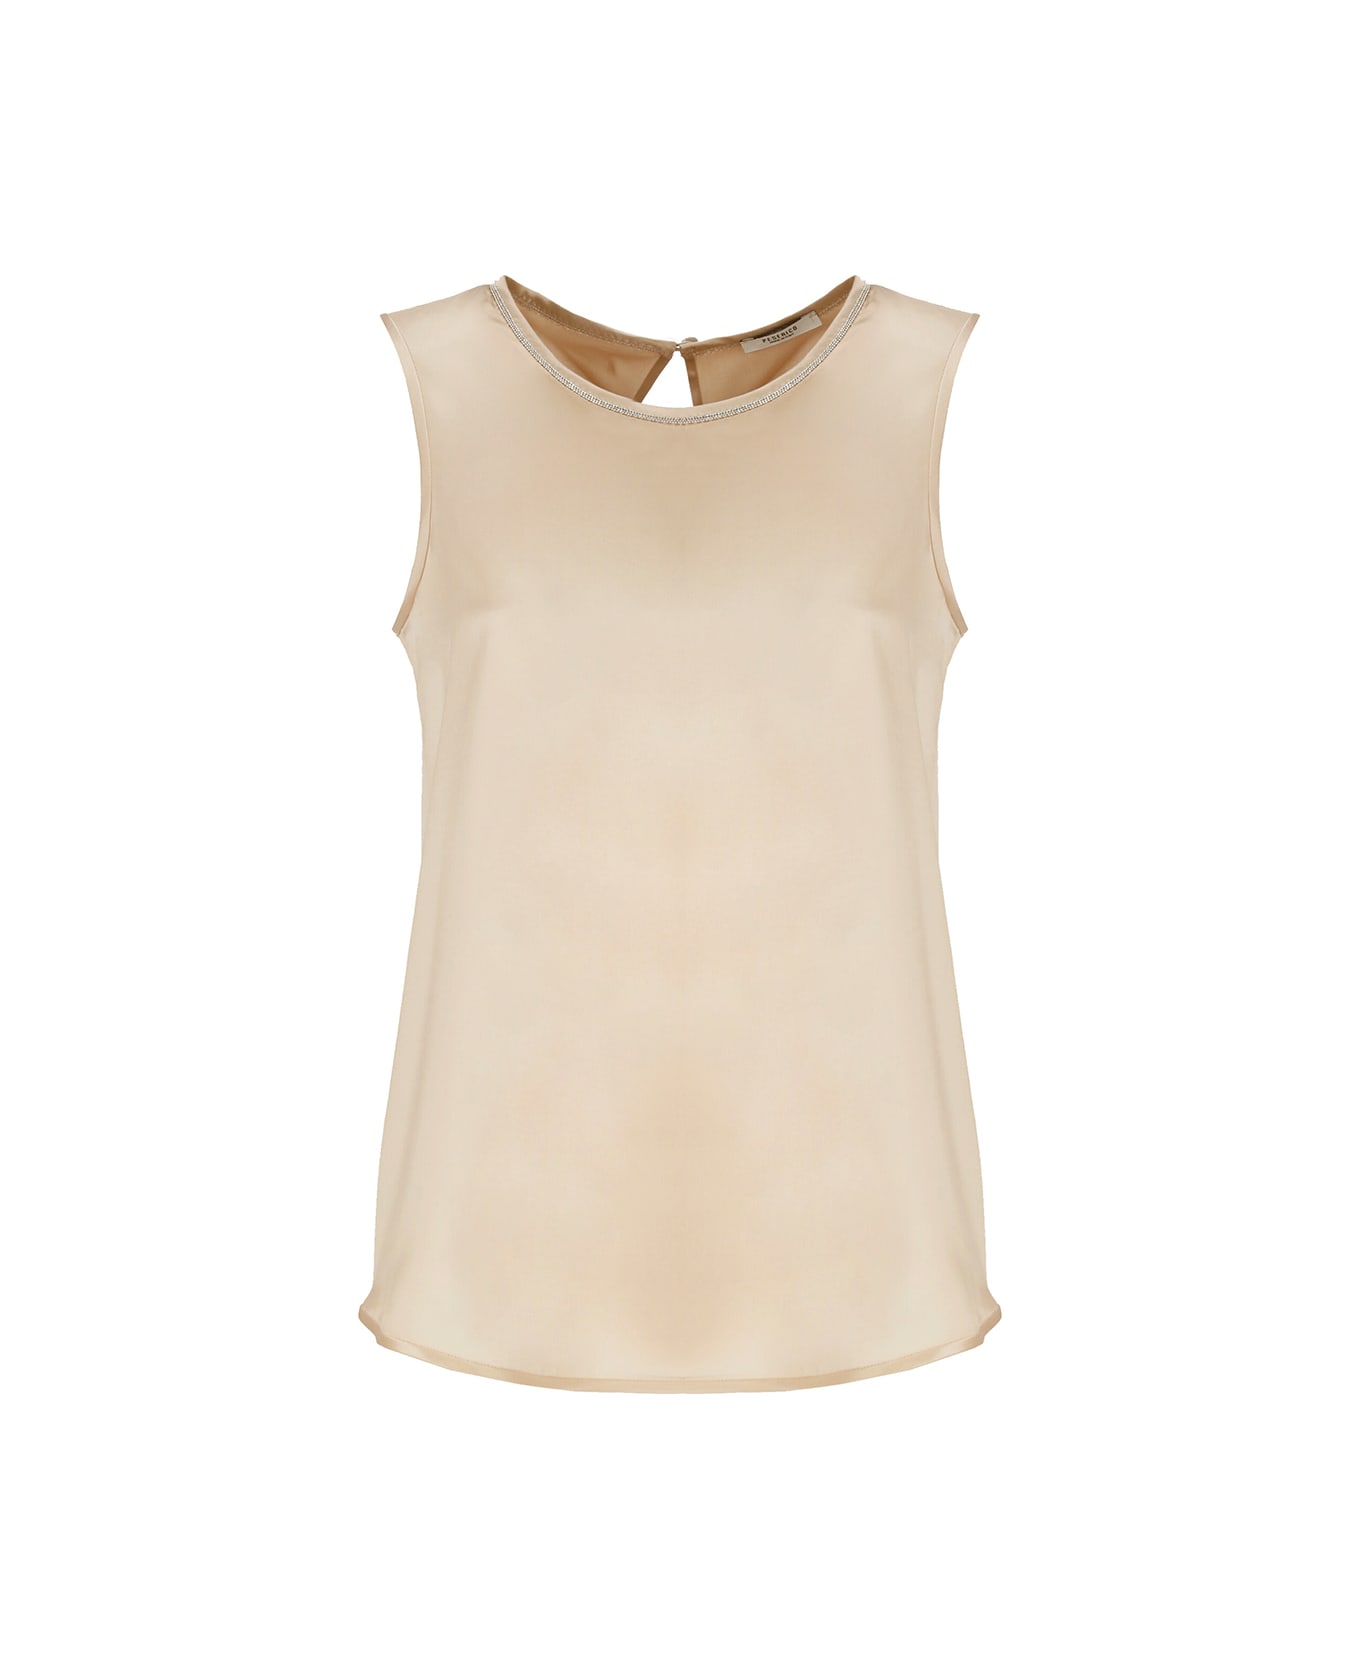 Peserico Top With Light Point Details - Beige タンクトップ